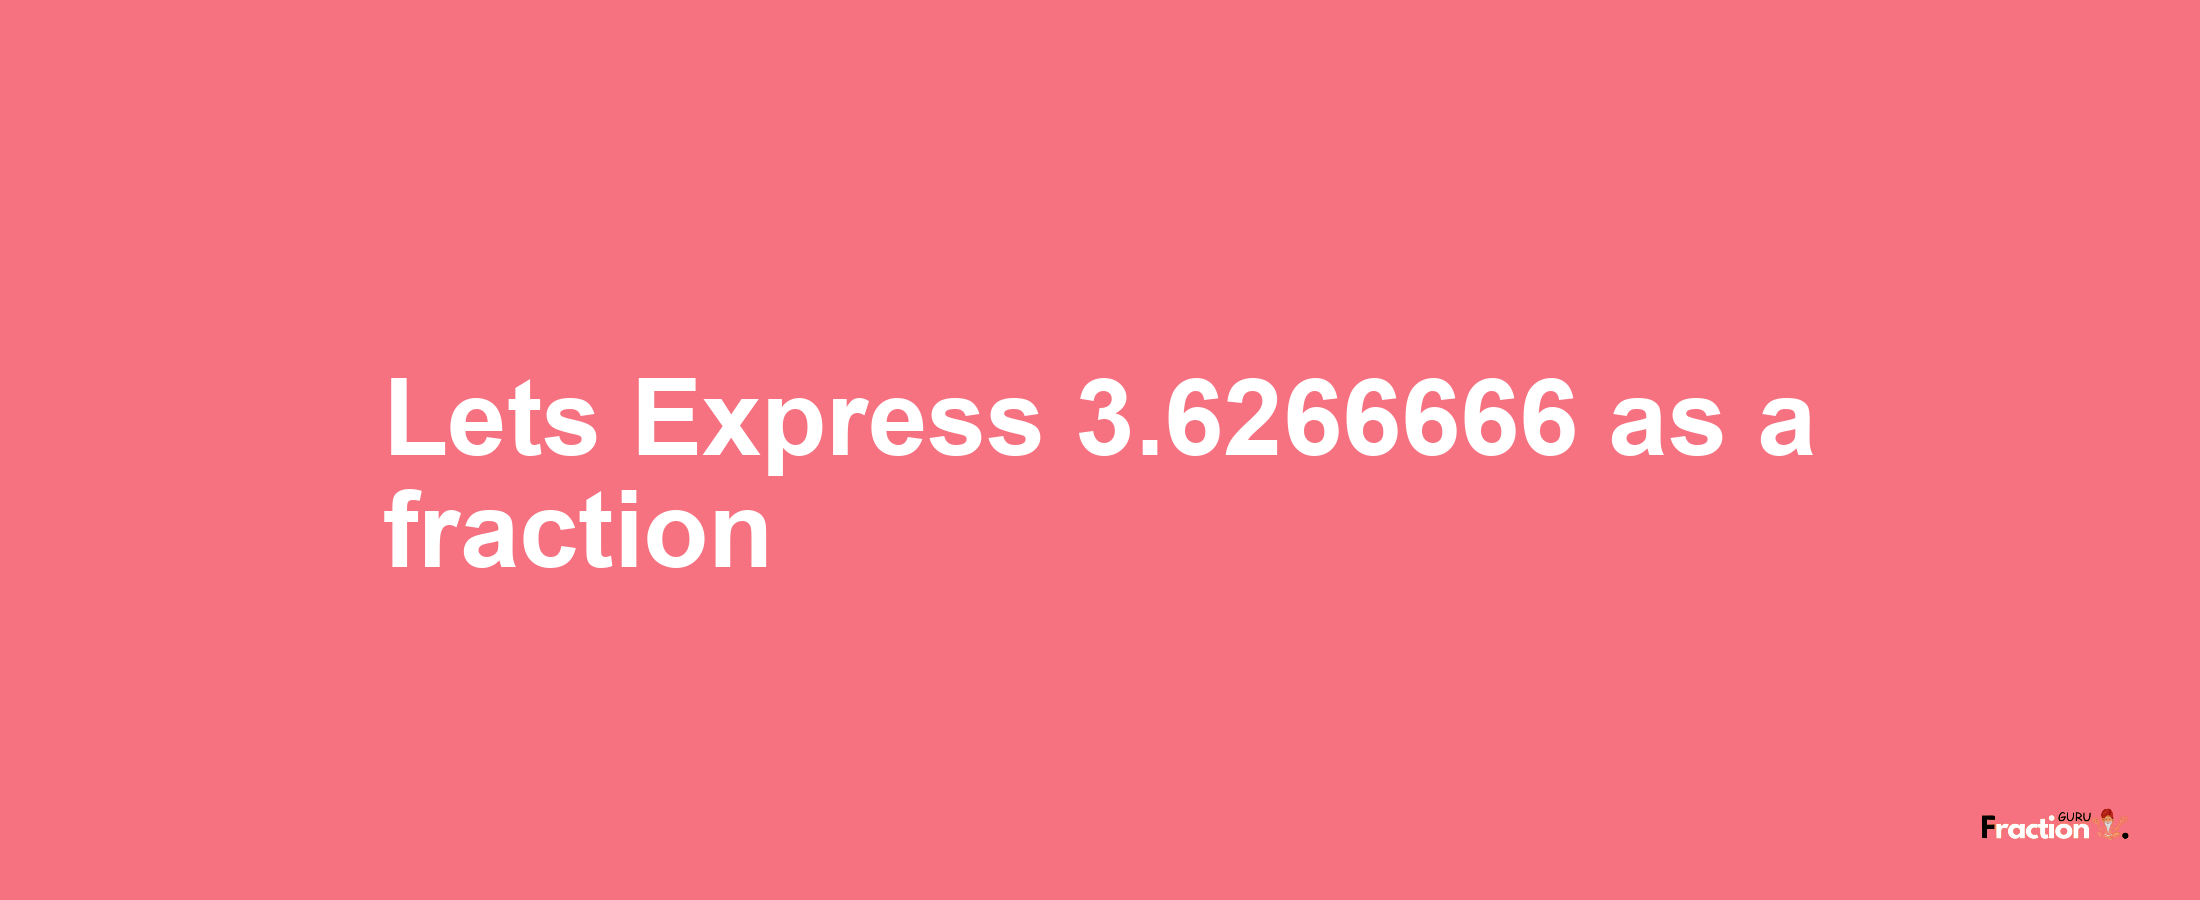 Lets Express 3.6266666 as afraction